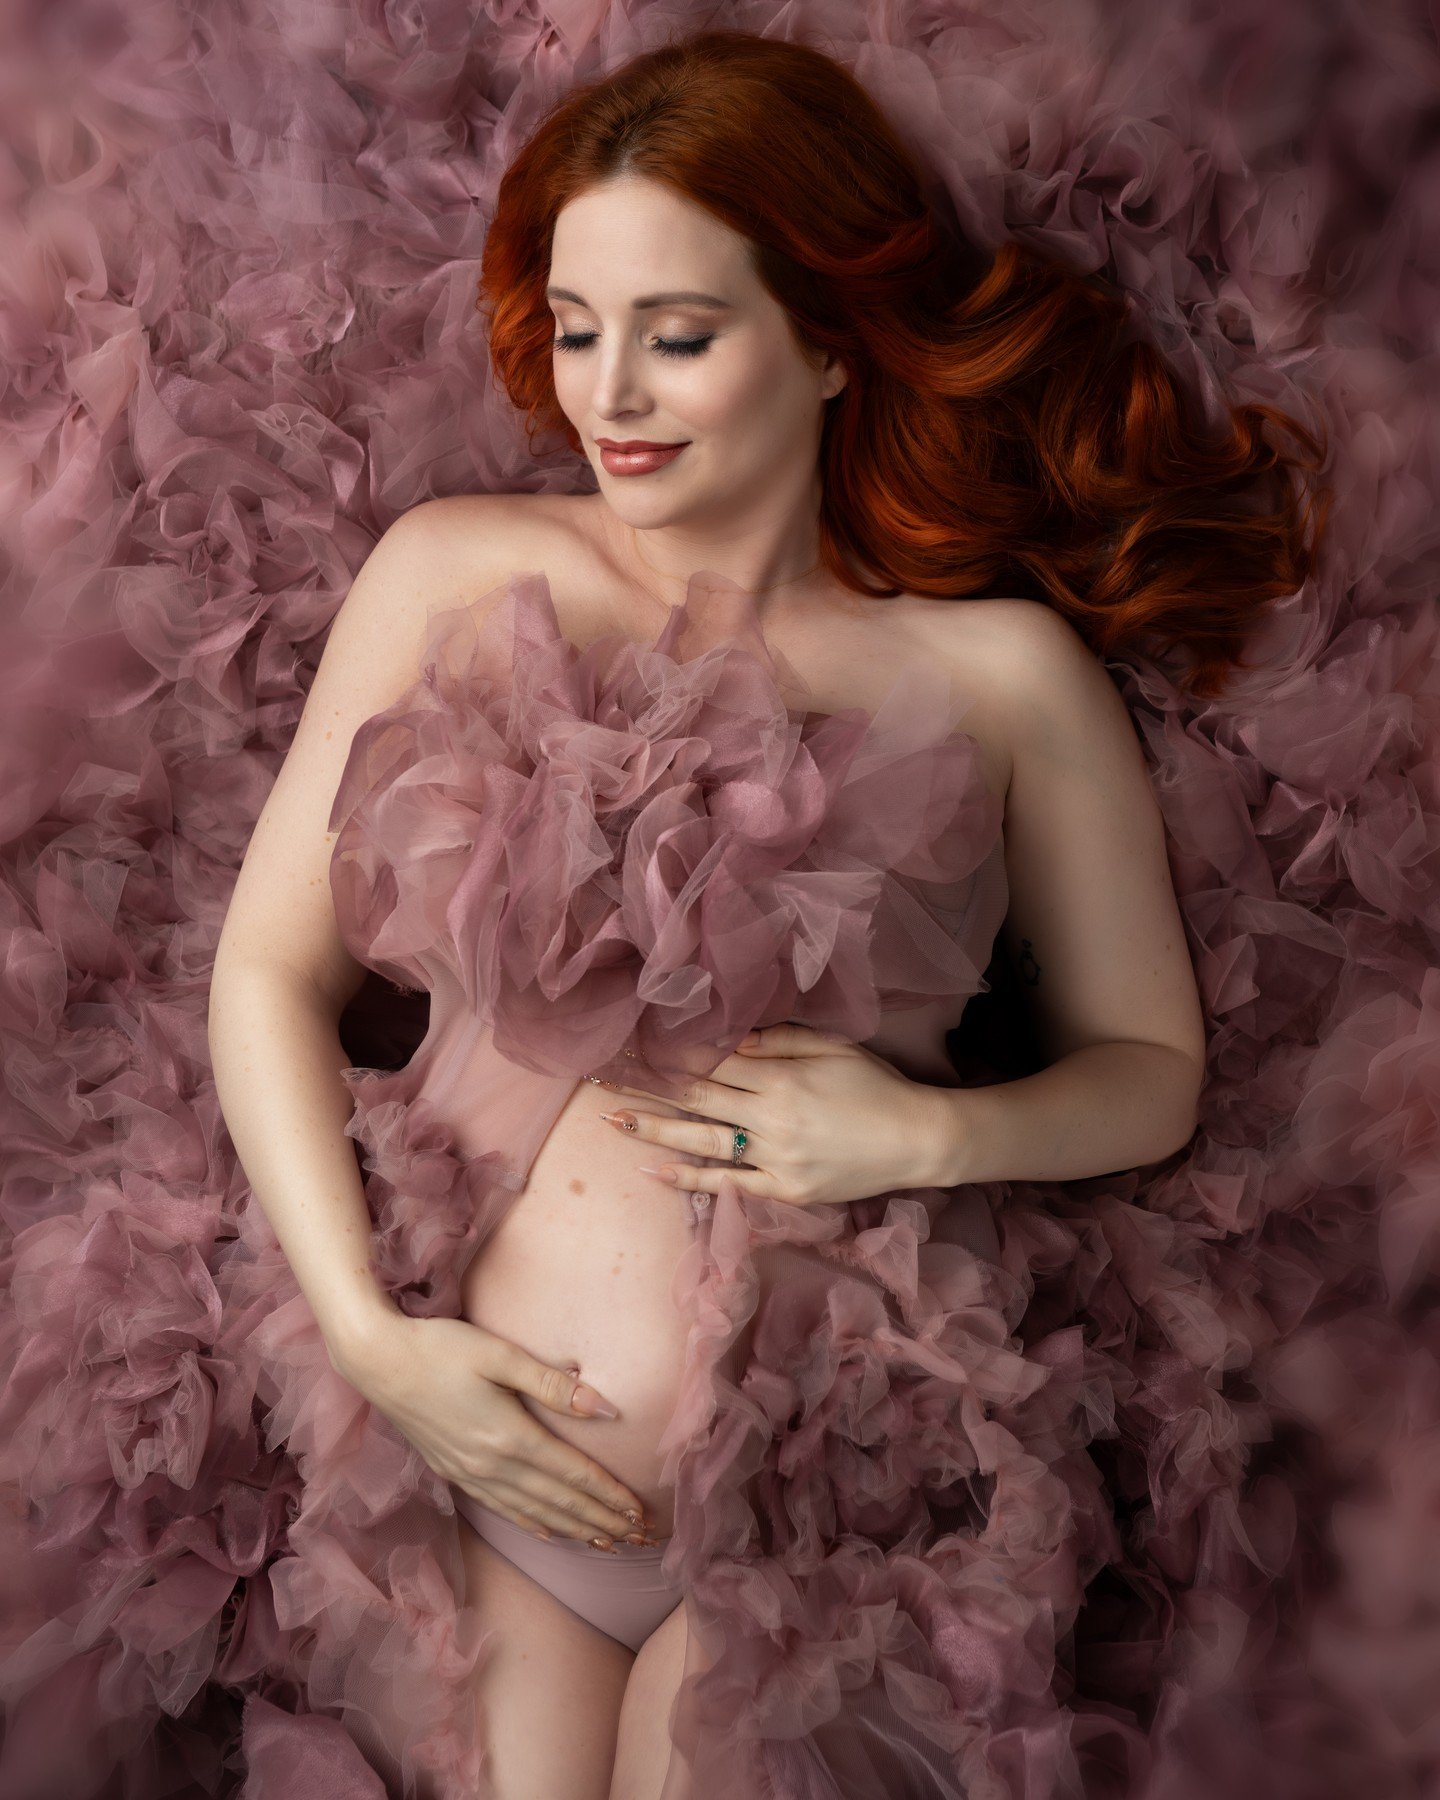 What an absolute goddess!

When she walked in with this amazing red hair I about fell over with excitement!

If you're looking for a glamorous, full-service maternity session with professional hair/makeup and a full wardrobe and you're due this fall,